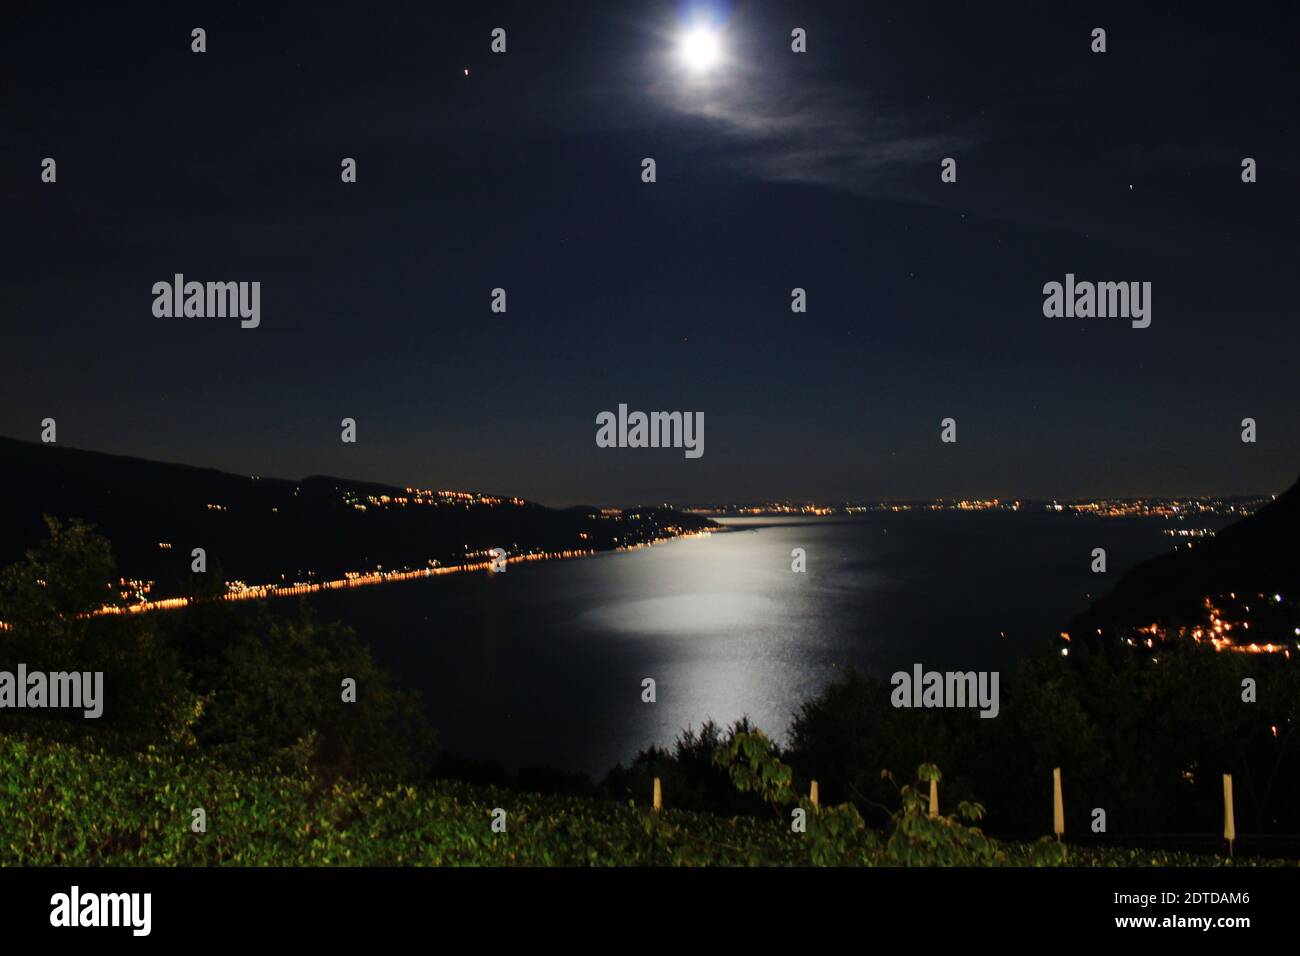 Scenic View Of River Against Sky At Night Stock Photo